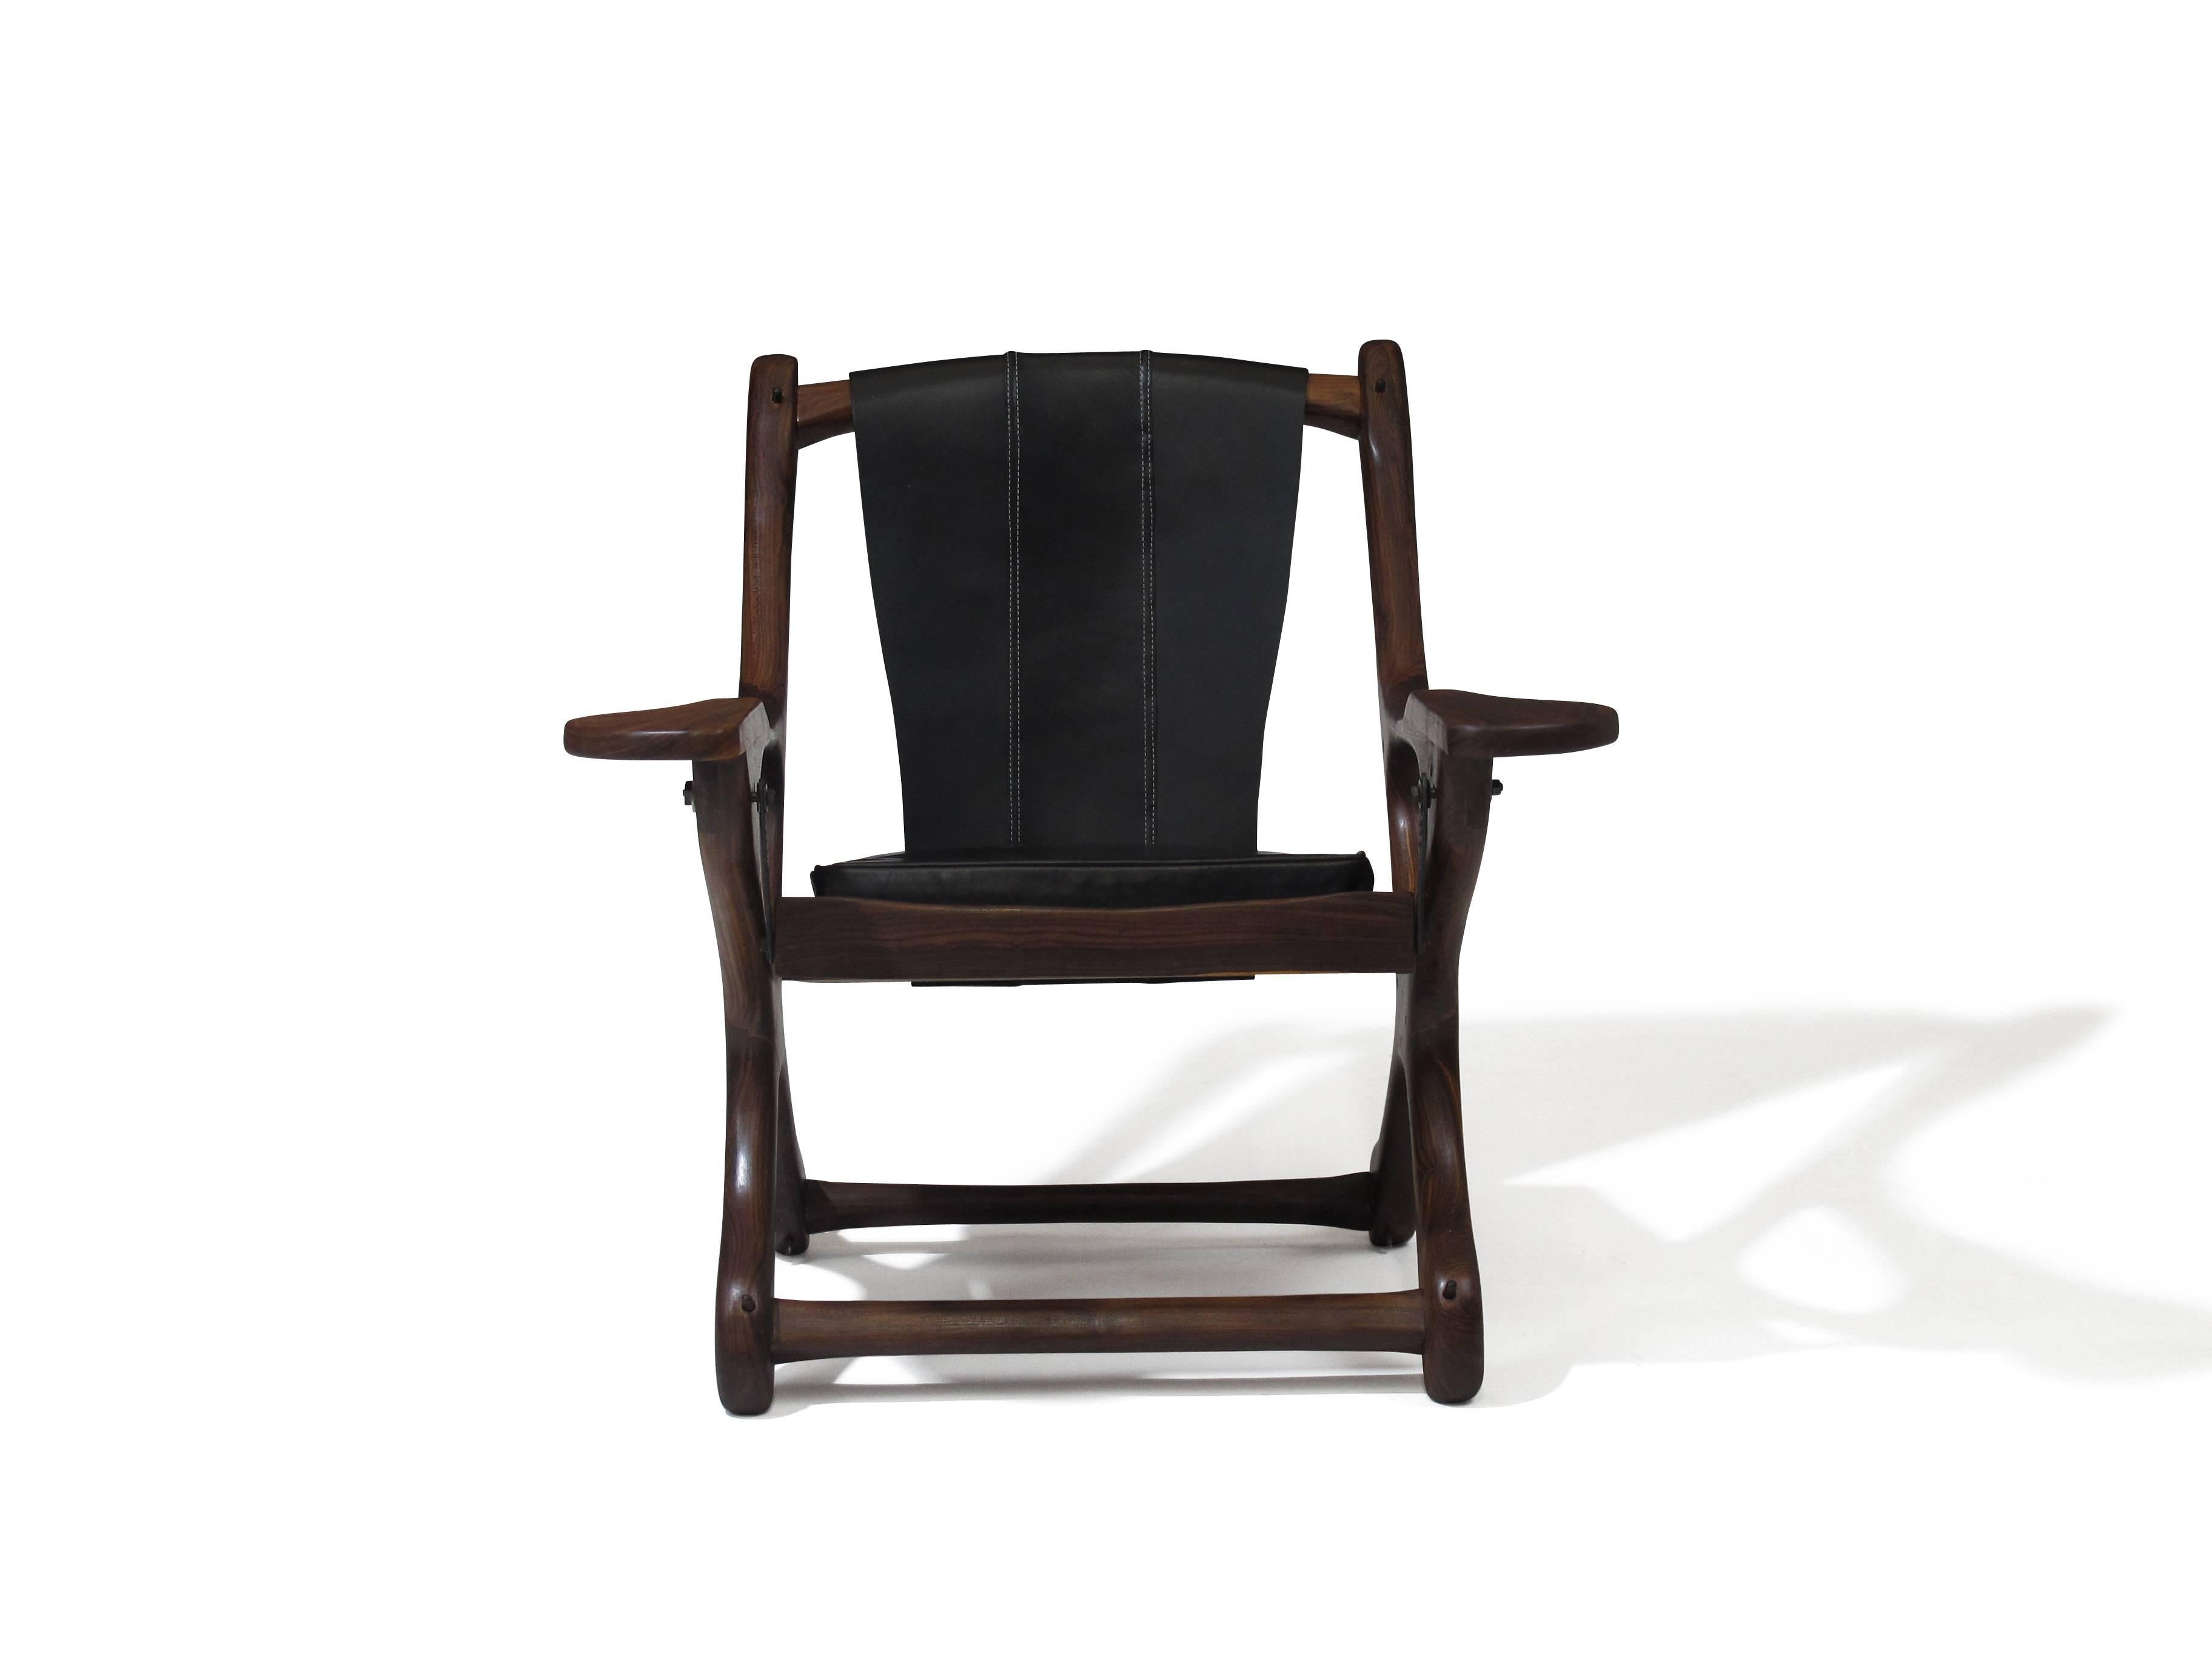 Swinger rosewood chair designed by Don Shoemaker. Solid cocobolo rosewood frame with doweled joints, handcrafted in Mexico, late 1950s. Newly restored and upholstered in black leather.